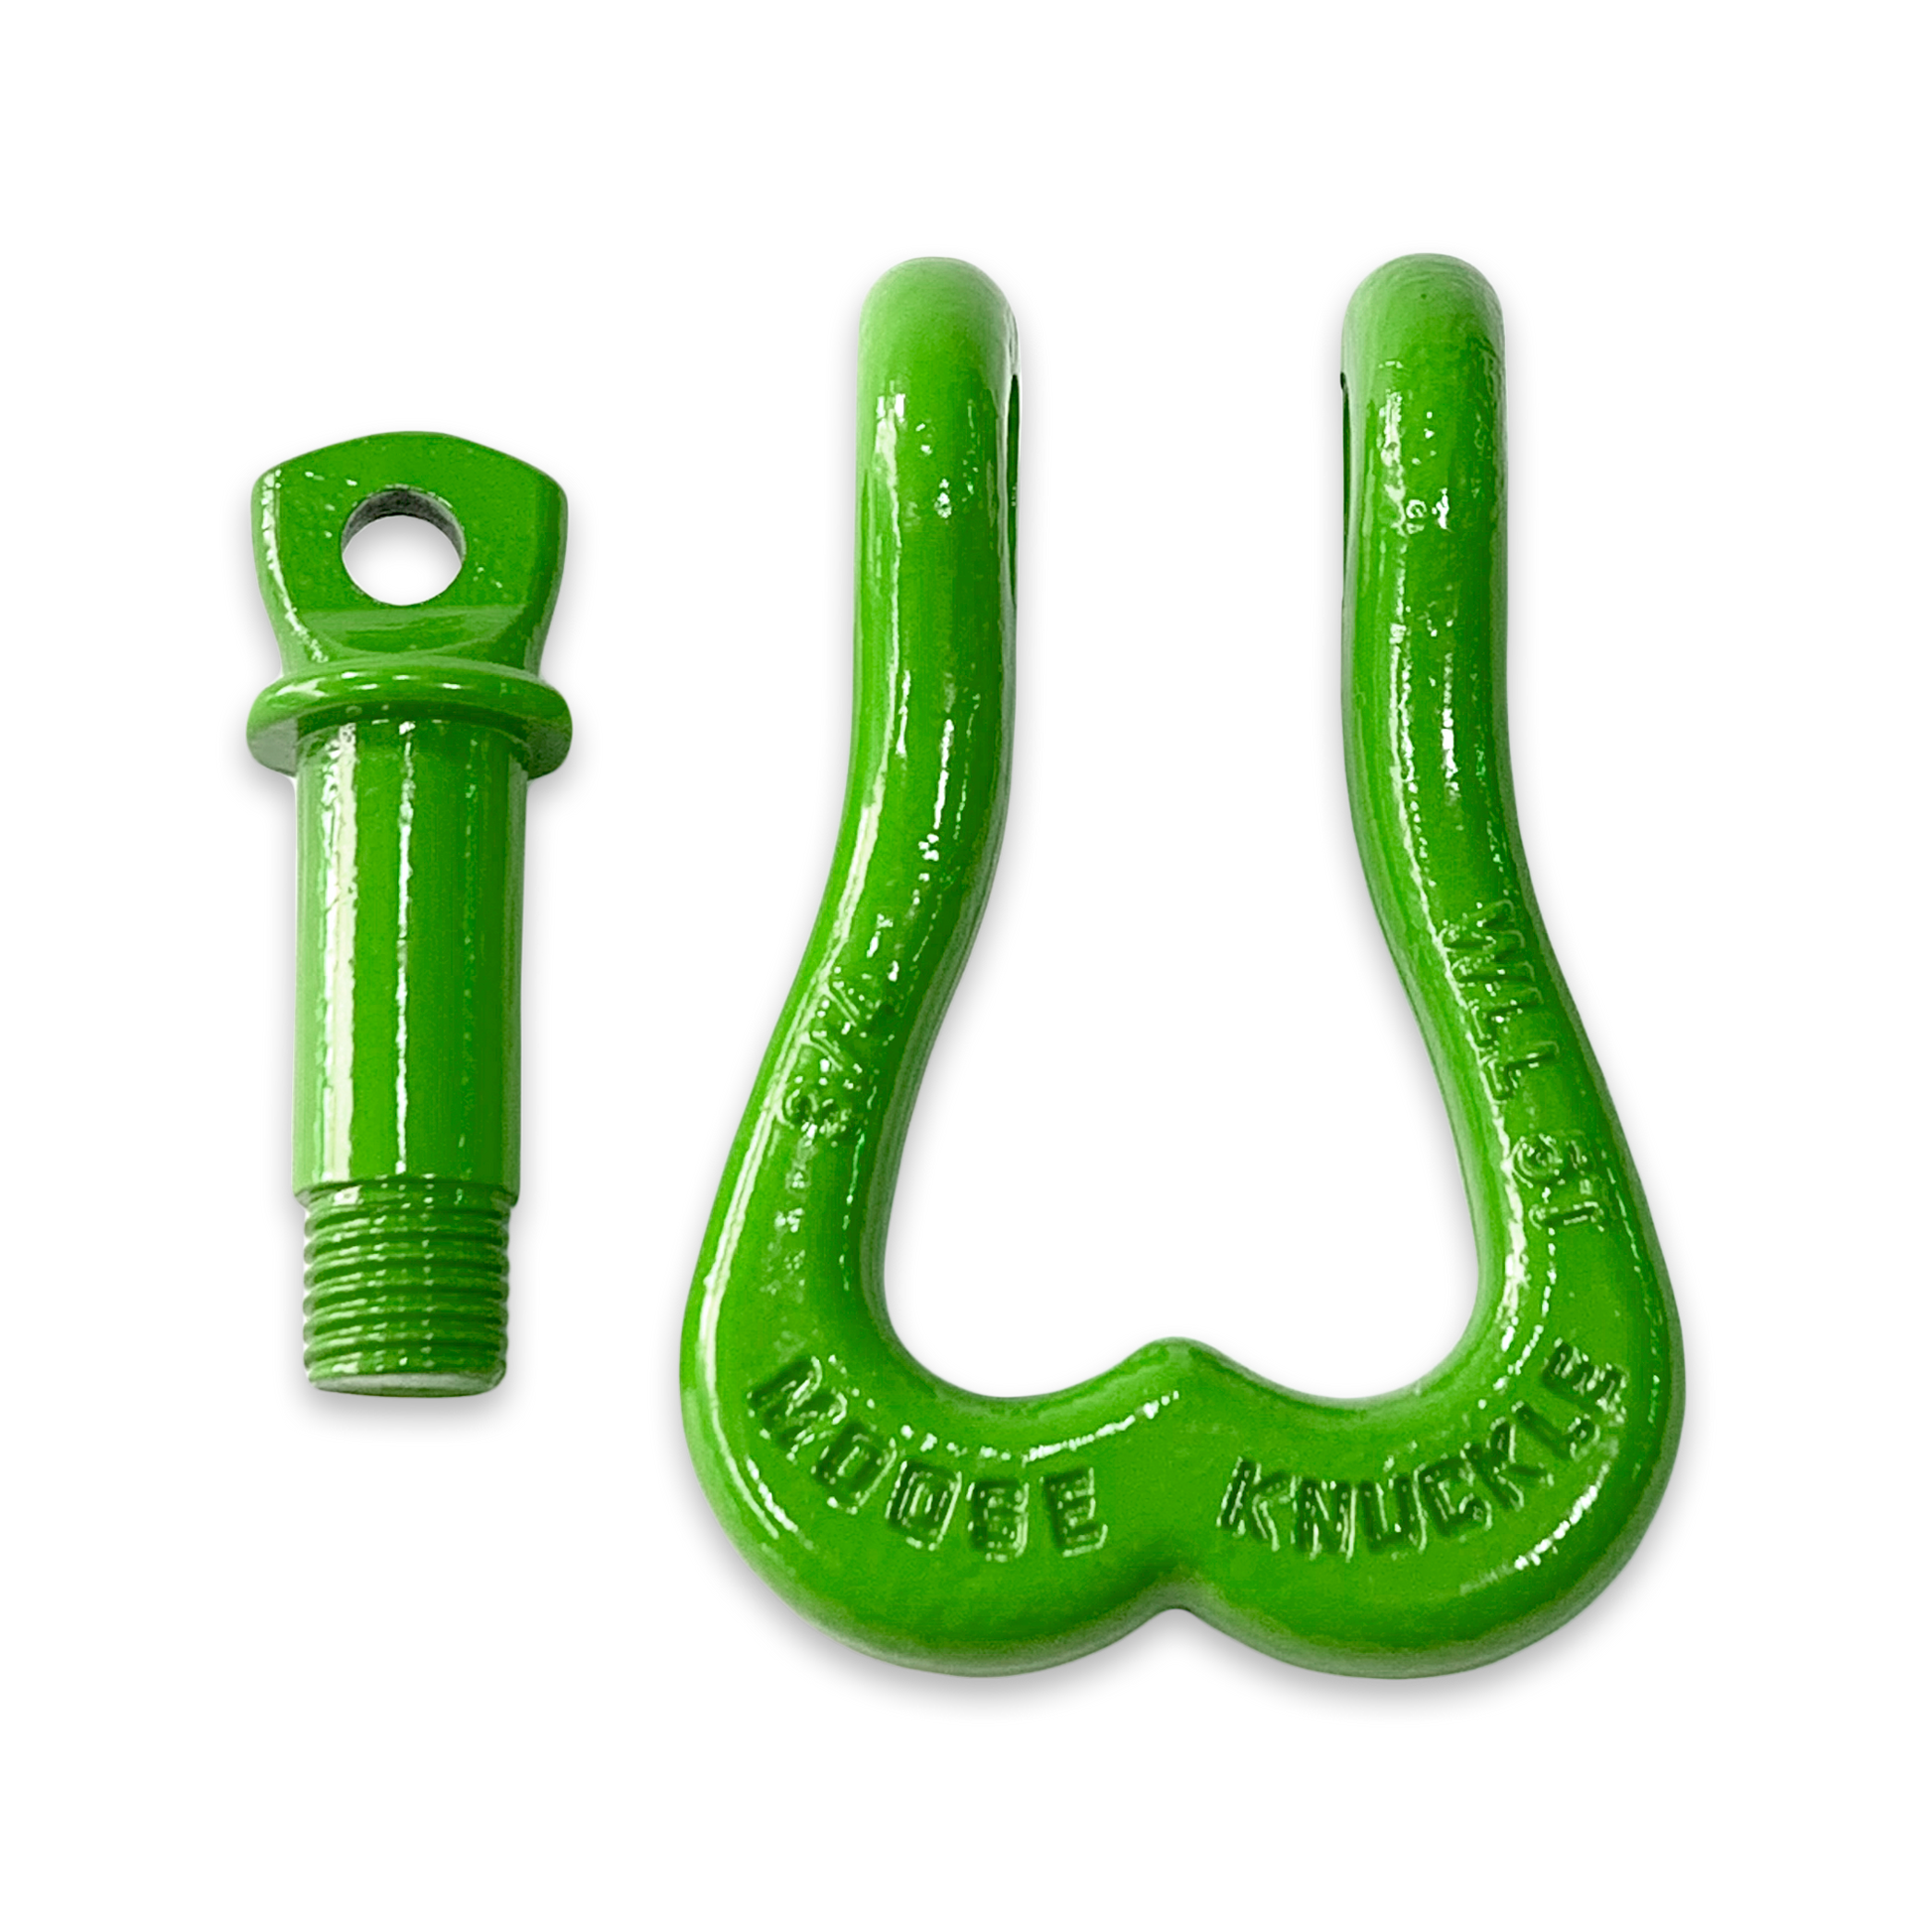 Moose Knuckle XL Sublime Green Heavy Duty Extra Strong Patent Pending 3/4" Shackle for Off-Road Vehicle Recovery to Replace Bull Balls